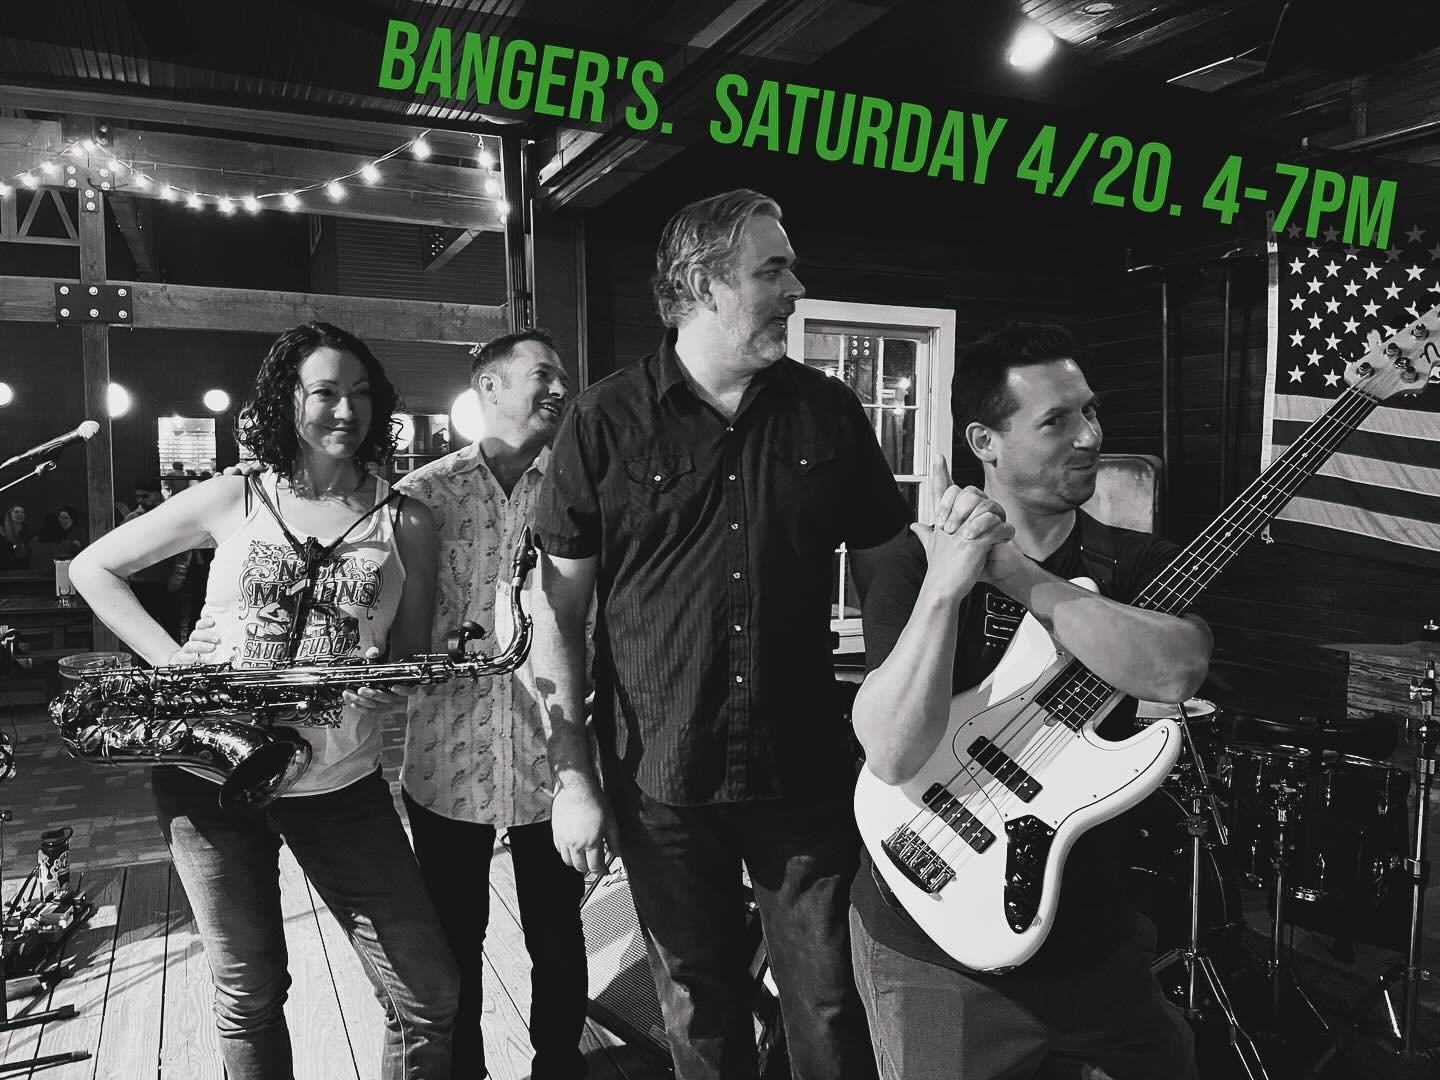 Whether you&rsquo;re celebrating 4/20, palindromic dates, or just the fact that it&rsquo;s Saturday, make your way down to @bangersaustin for an early evening show with us. Can&rsquo;t wait to see you!